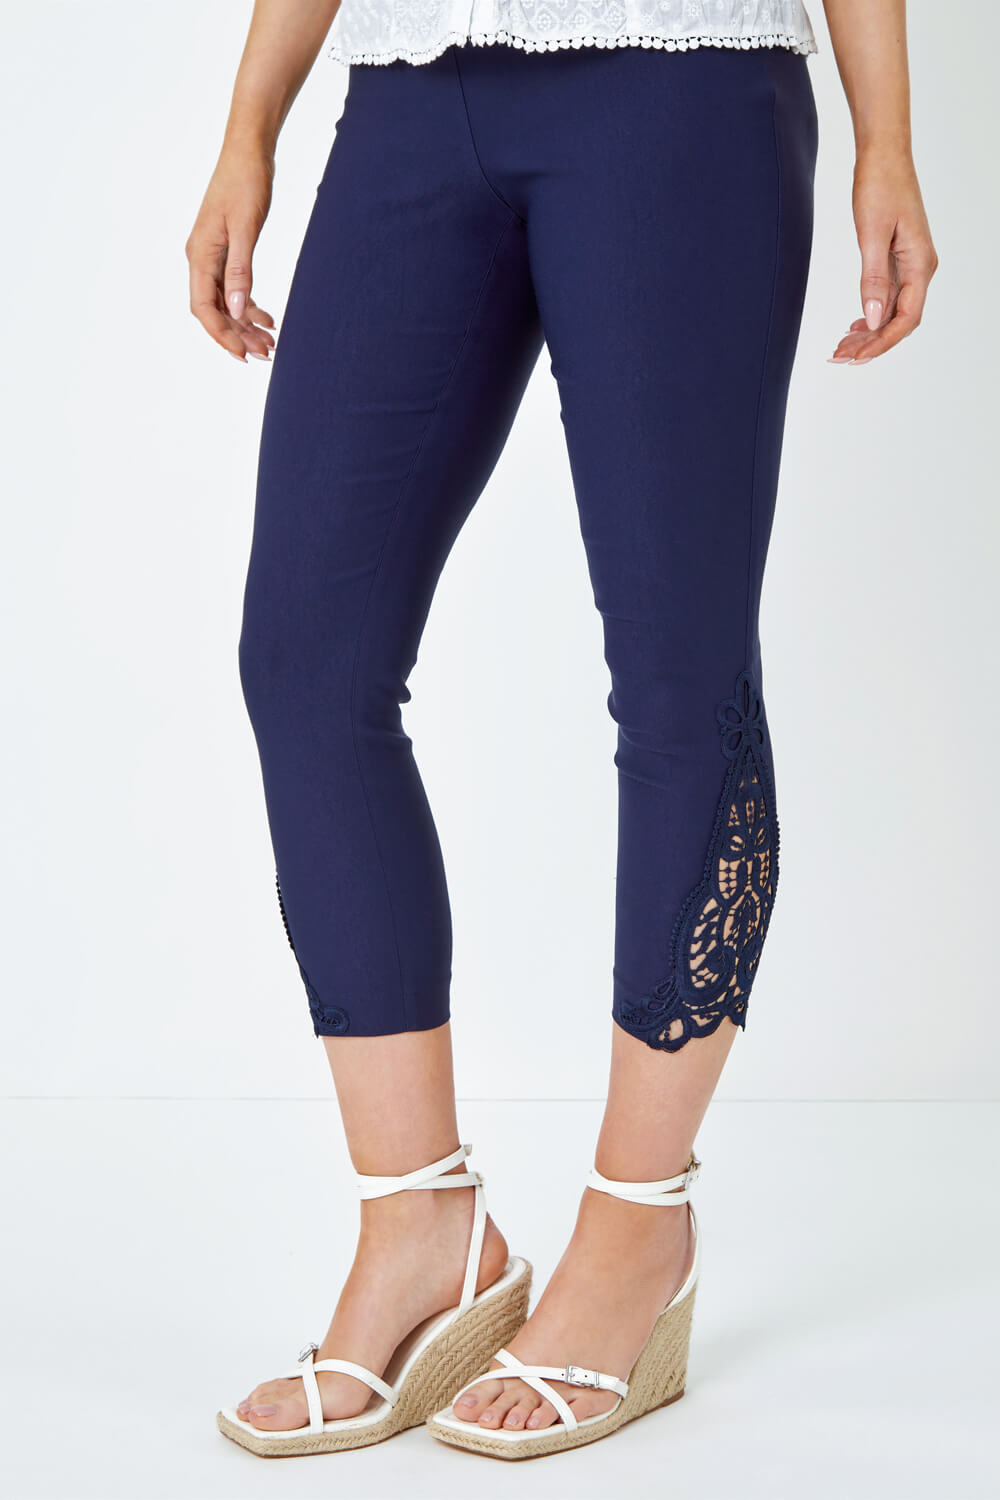 Navy  Lace Insert Crop Stretch Trousers, Image 4 of 5